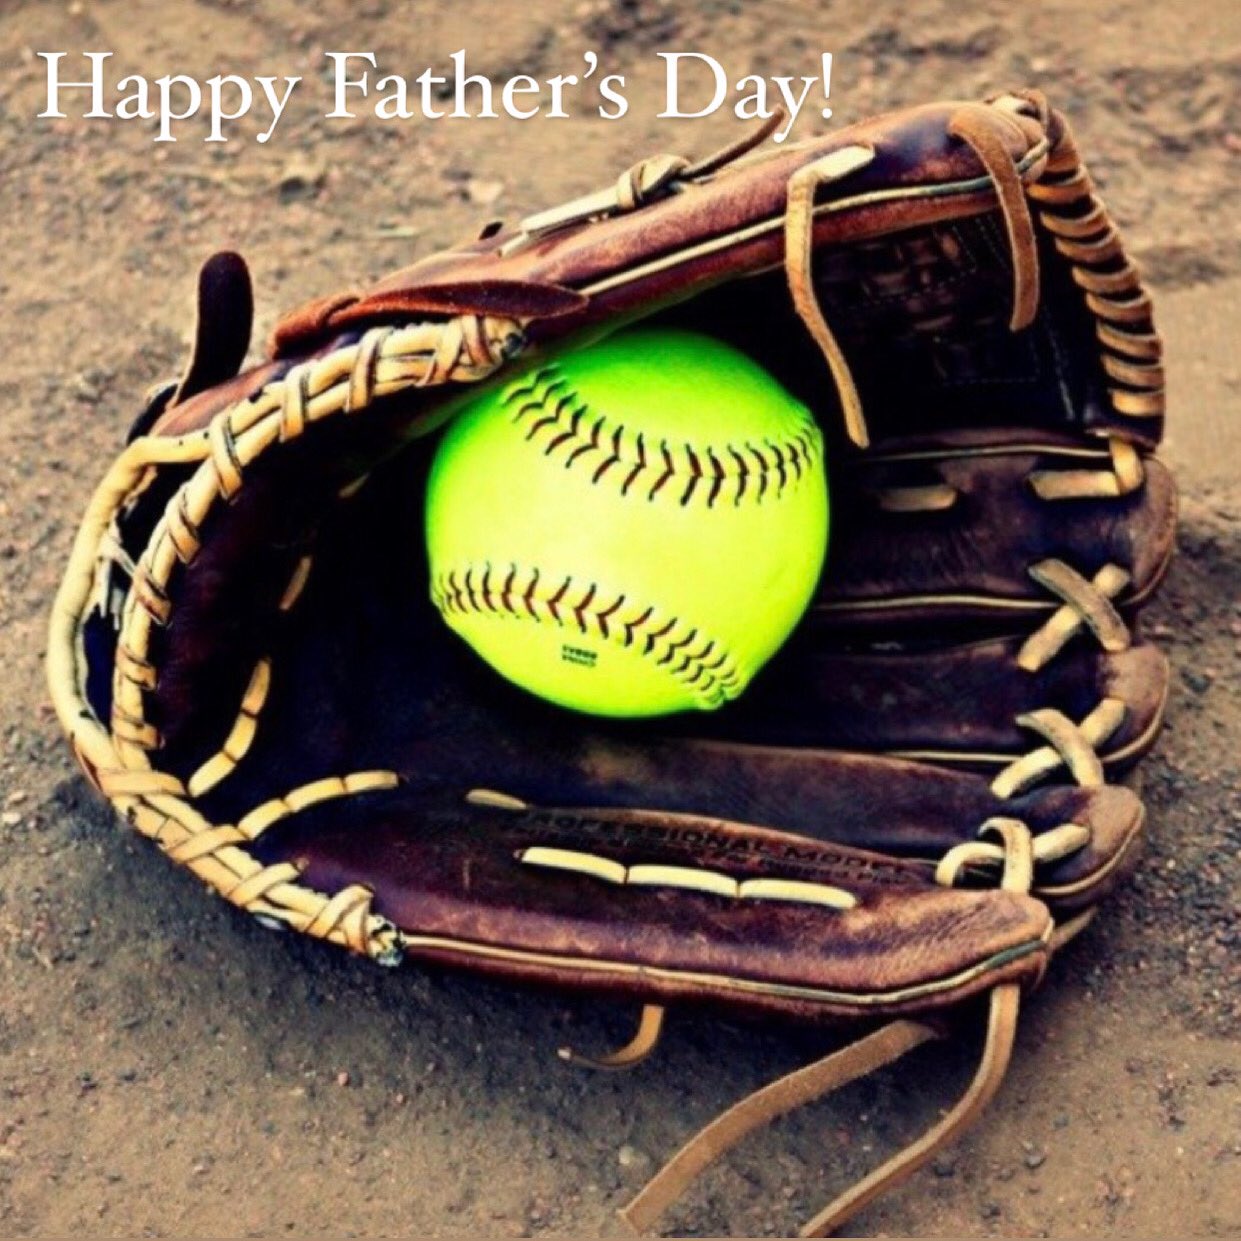 Blinn Softball on X: We want to wish a very Happy Father's Day to